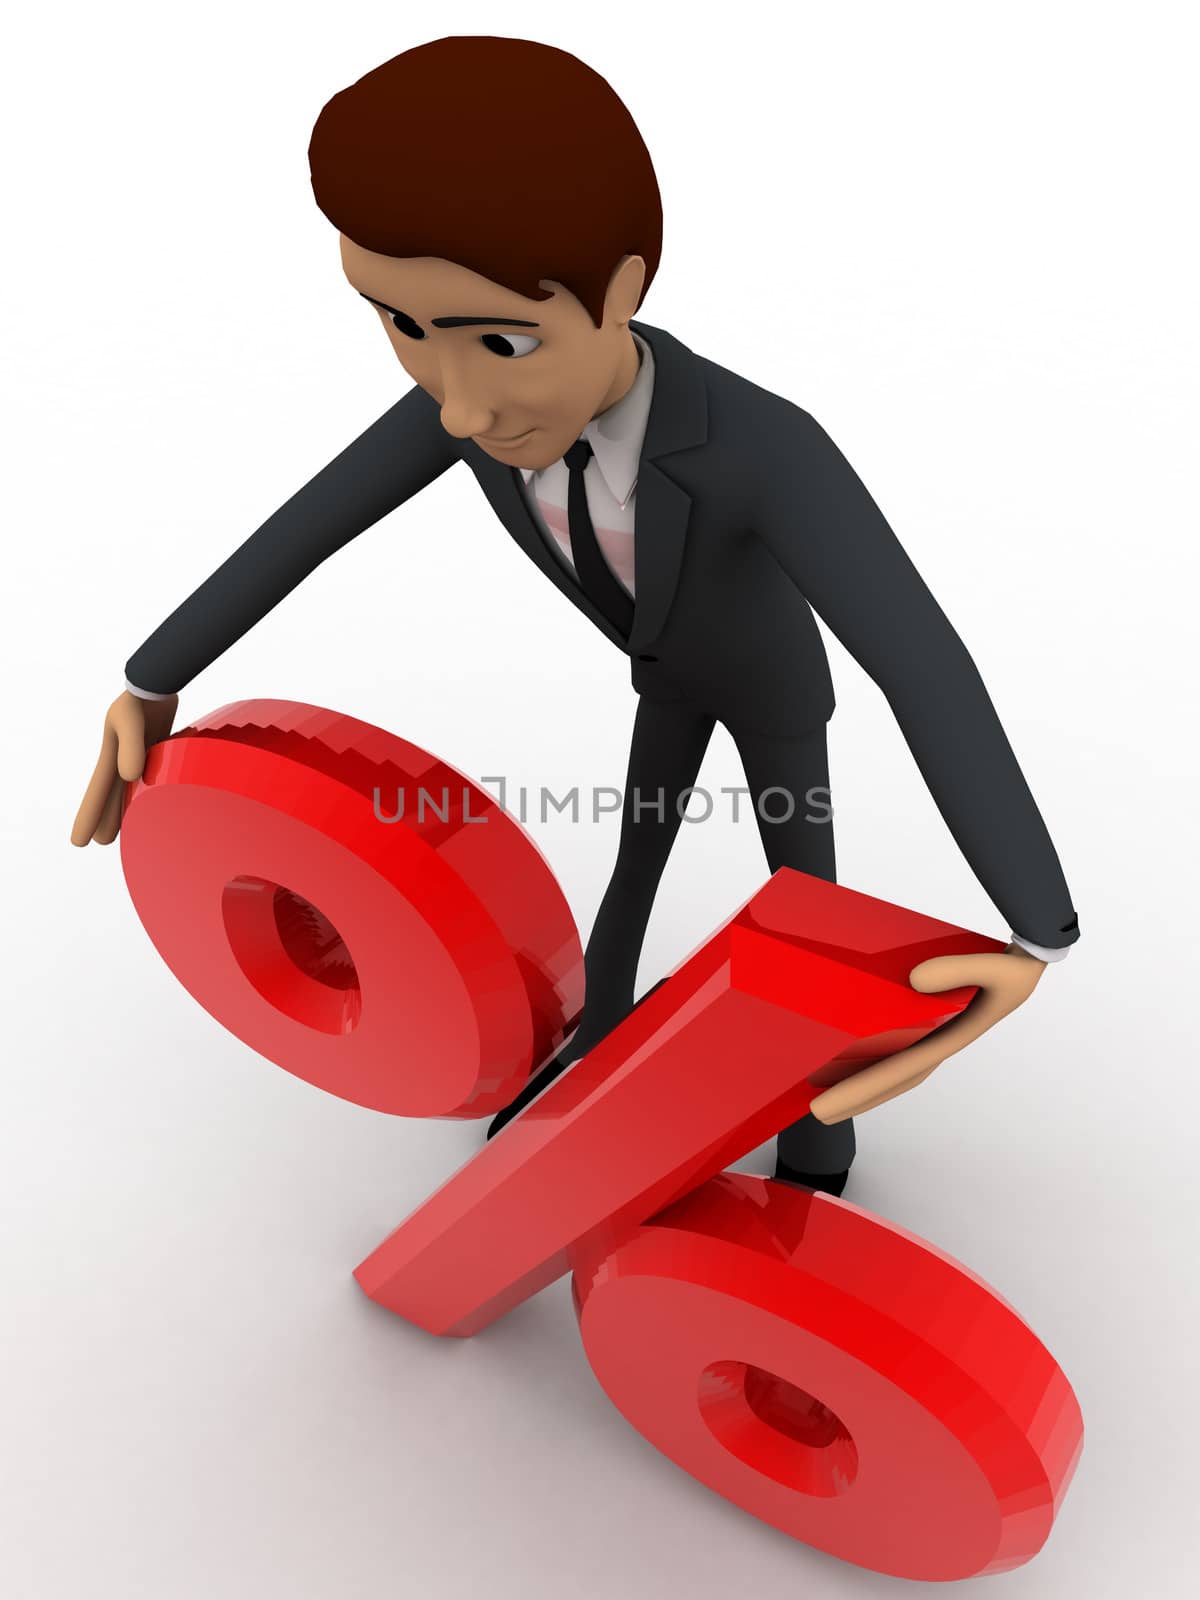 3d man holding red percent symbol in hand concept on white backgorund, top angle view